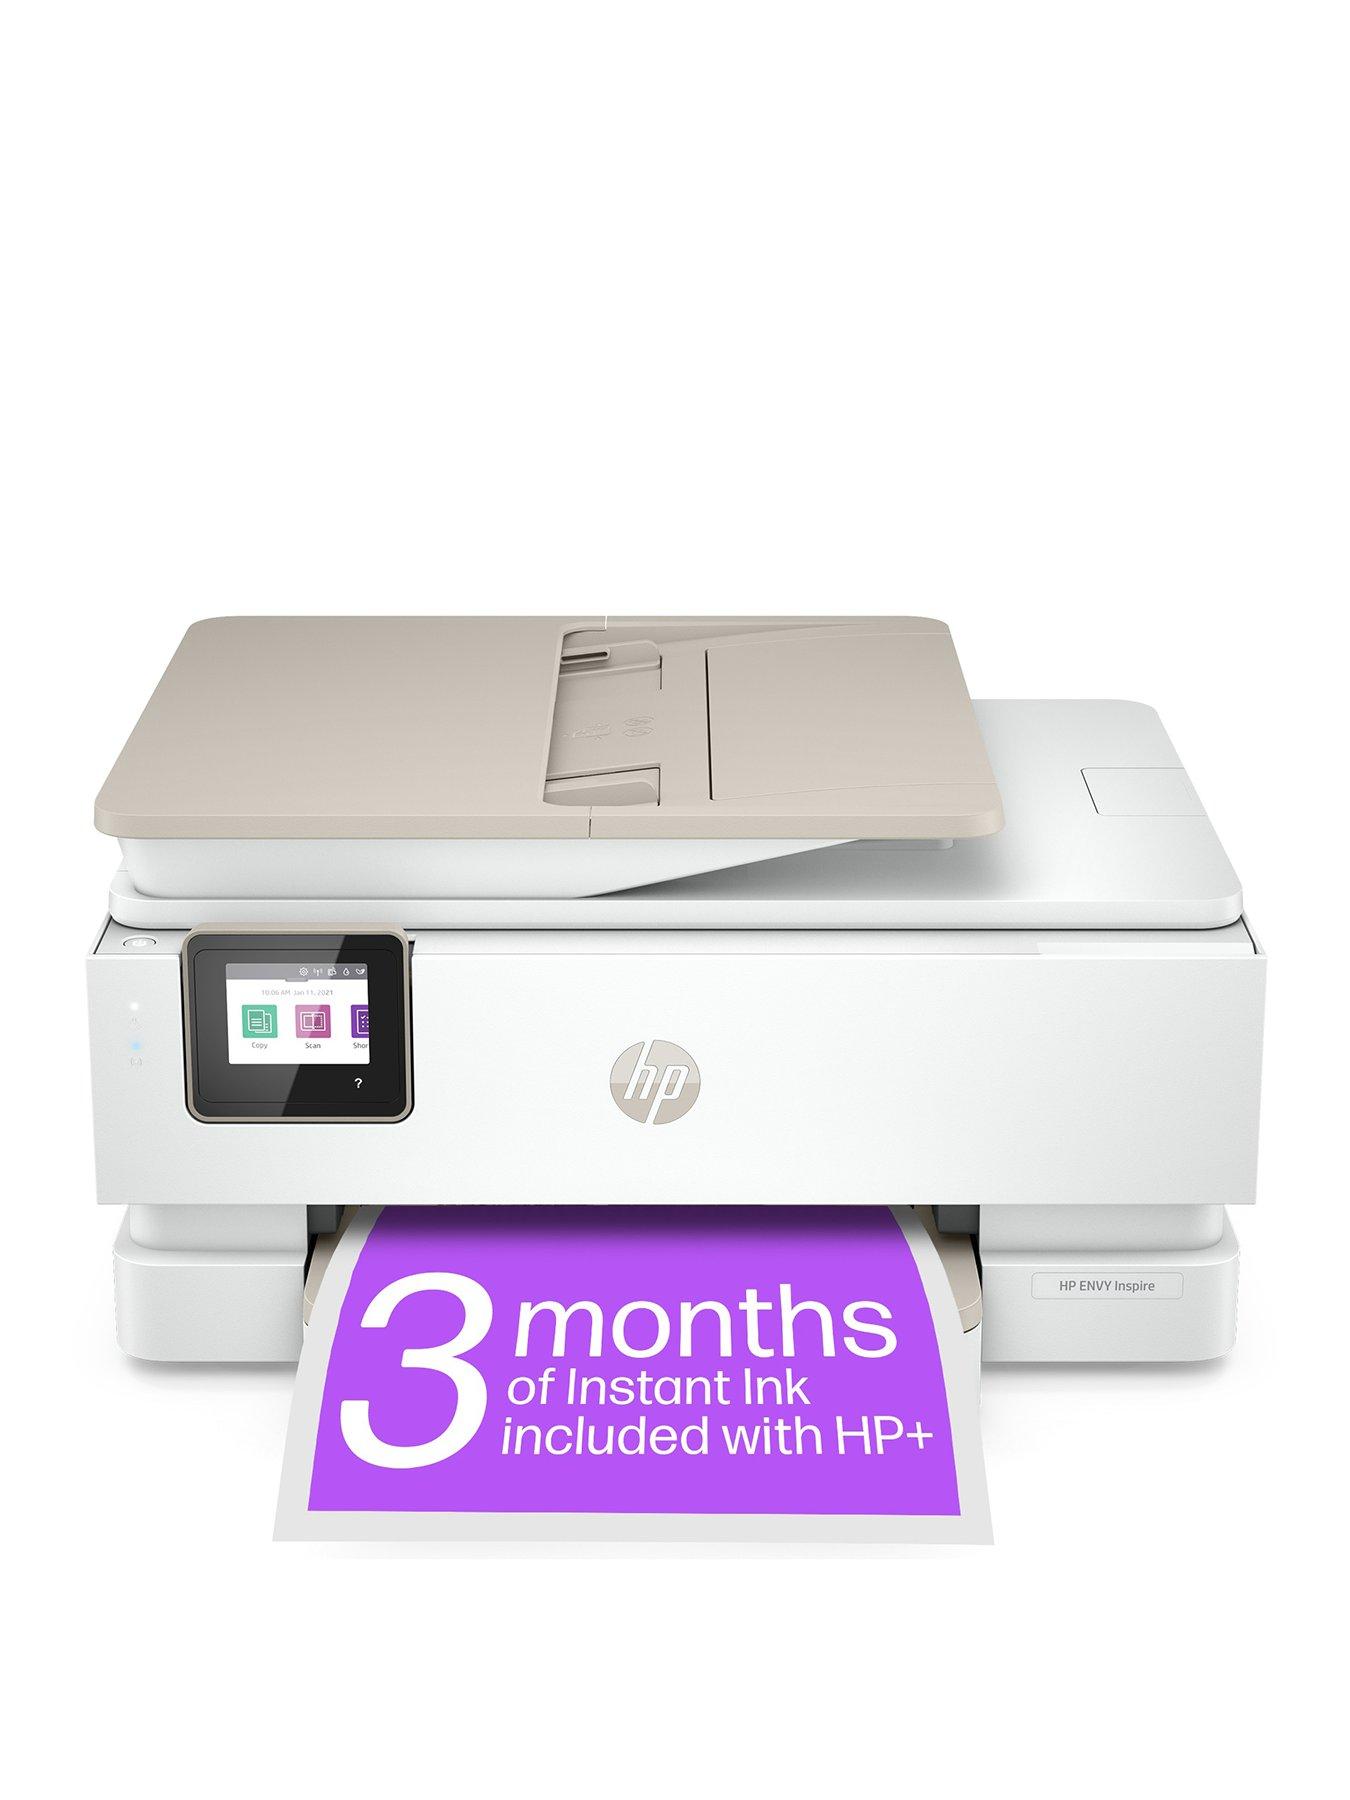 Hp Envy Inspire 7920E All In One Wireless Printer With 3 Months Of Instant Ink Included With Hp+